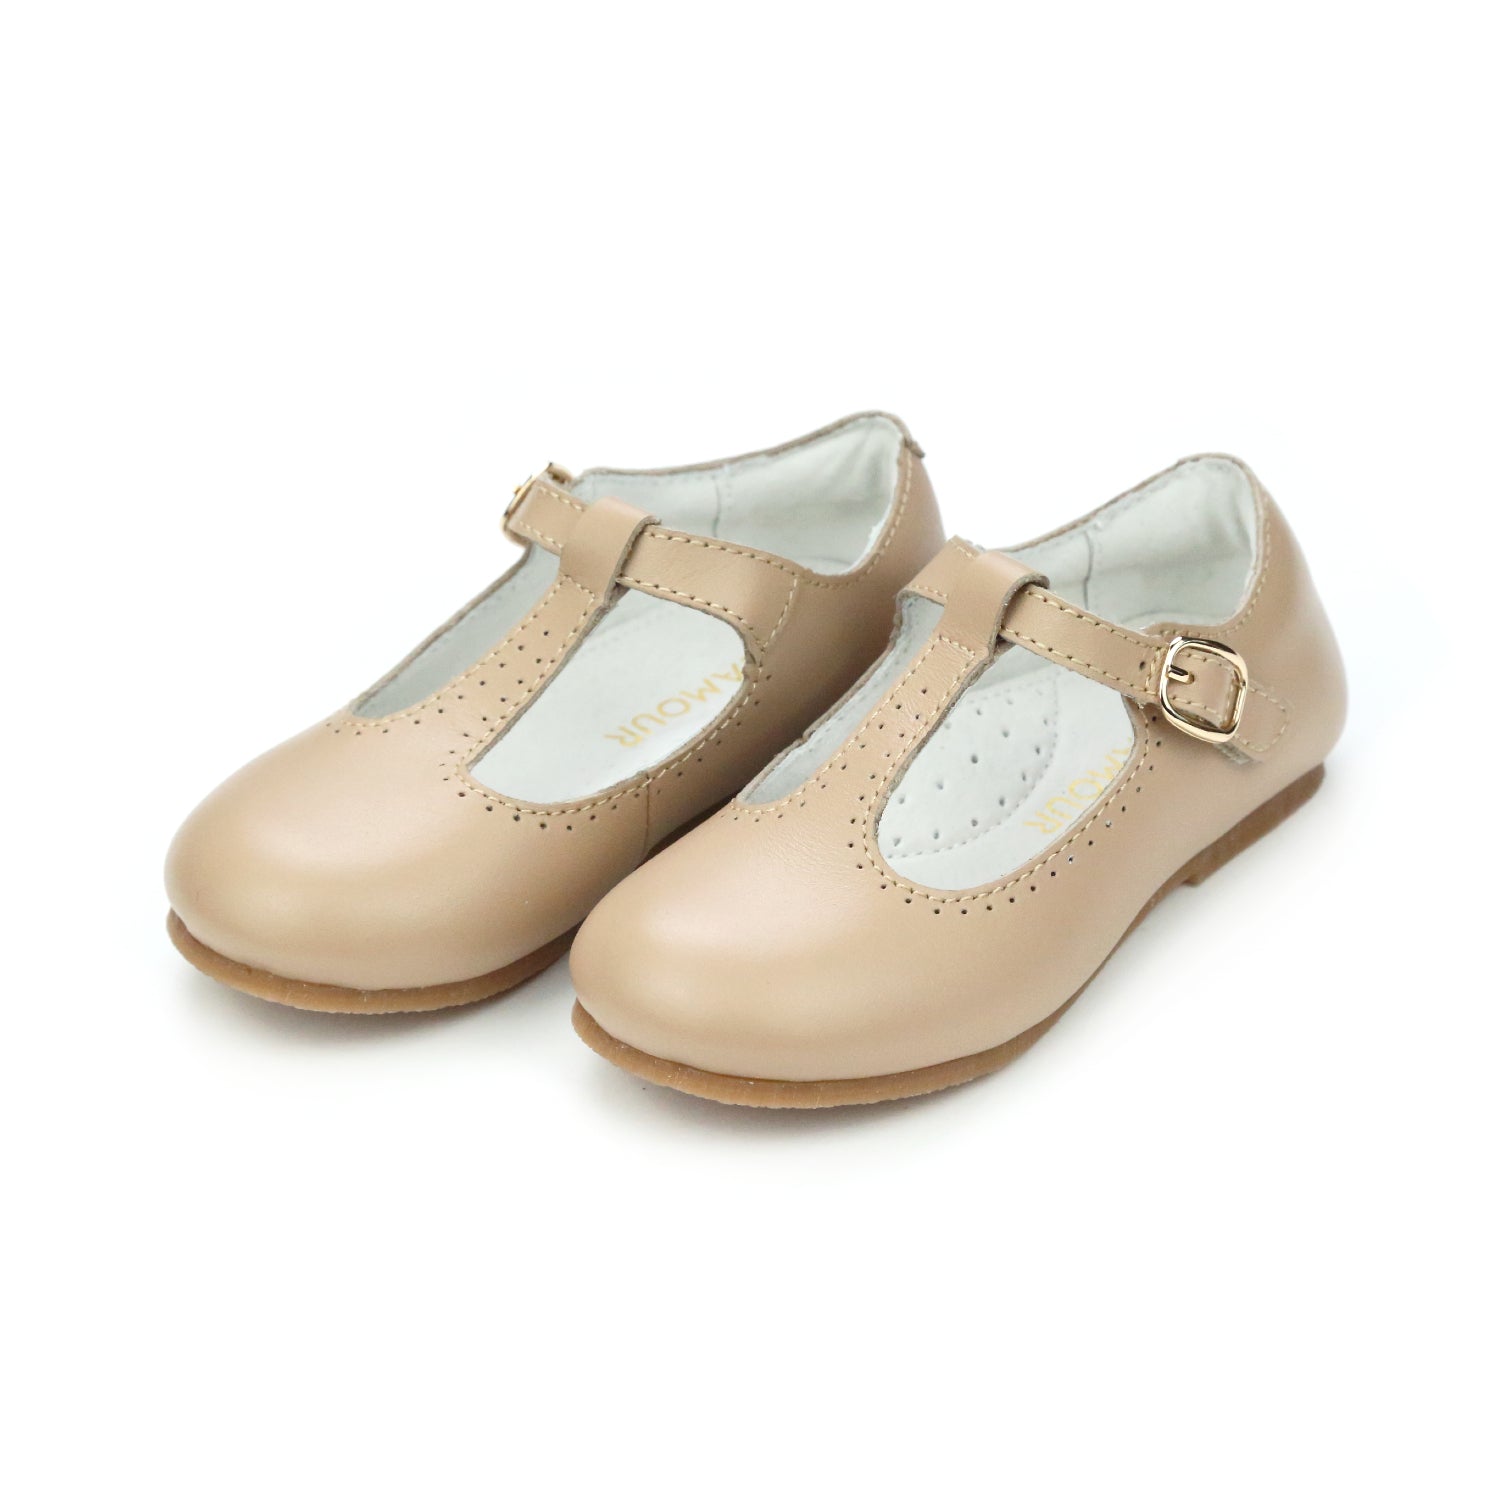 L'Amour Shoes Classic Toddler Girls Eleanor T-Bar Leather Flat